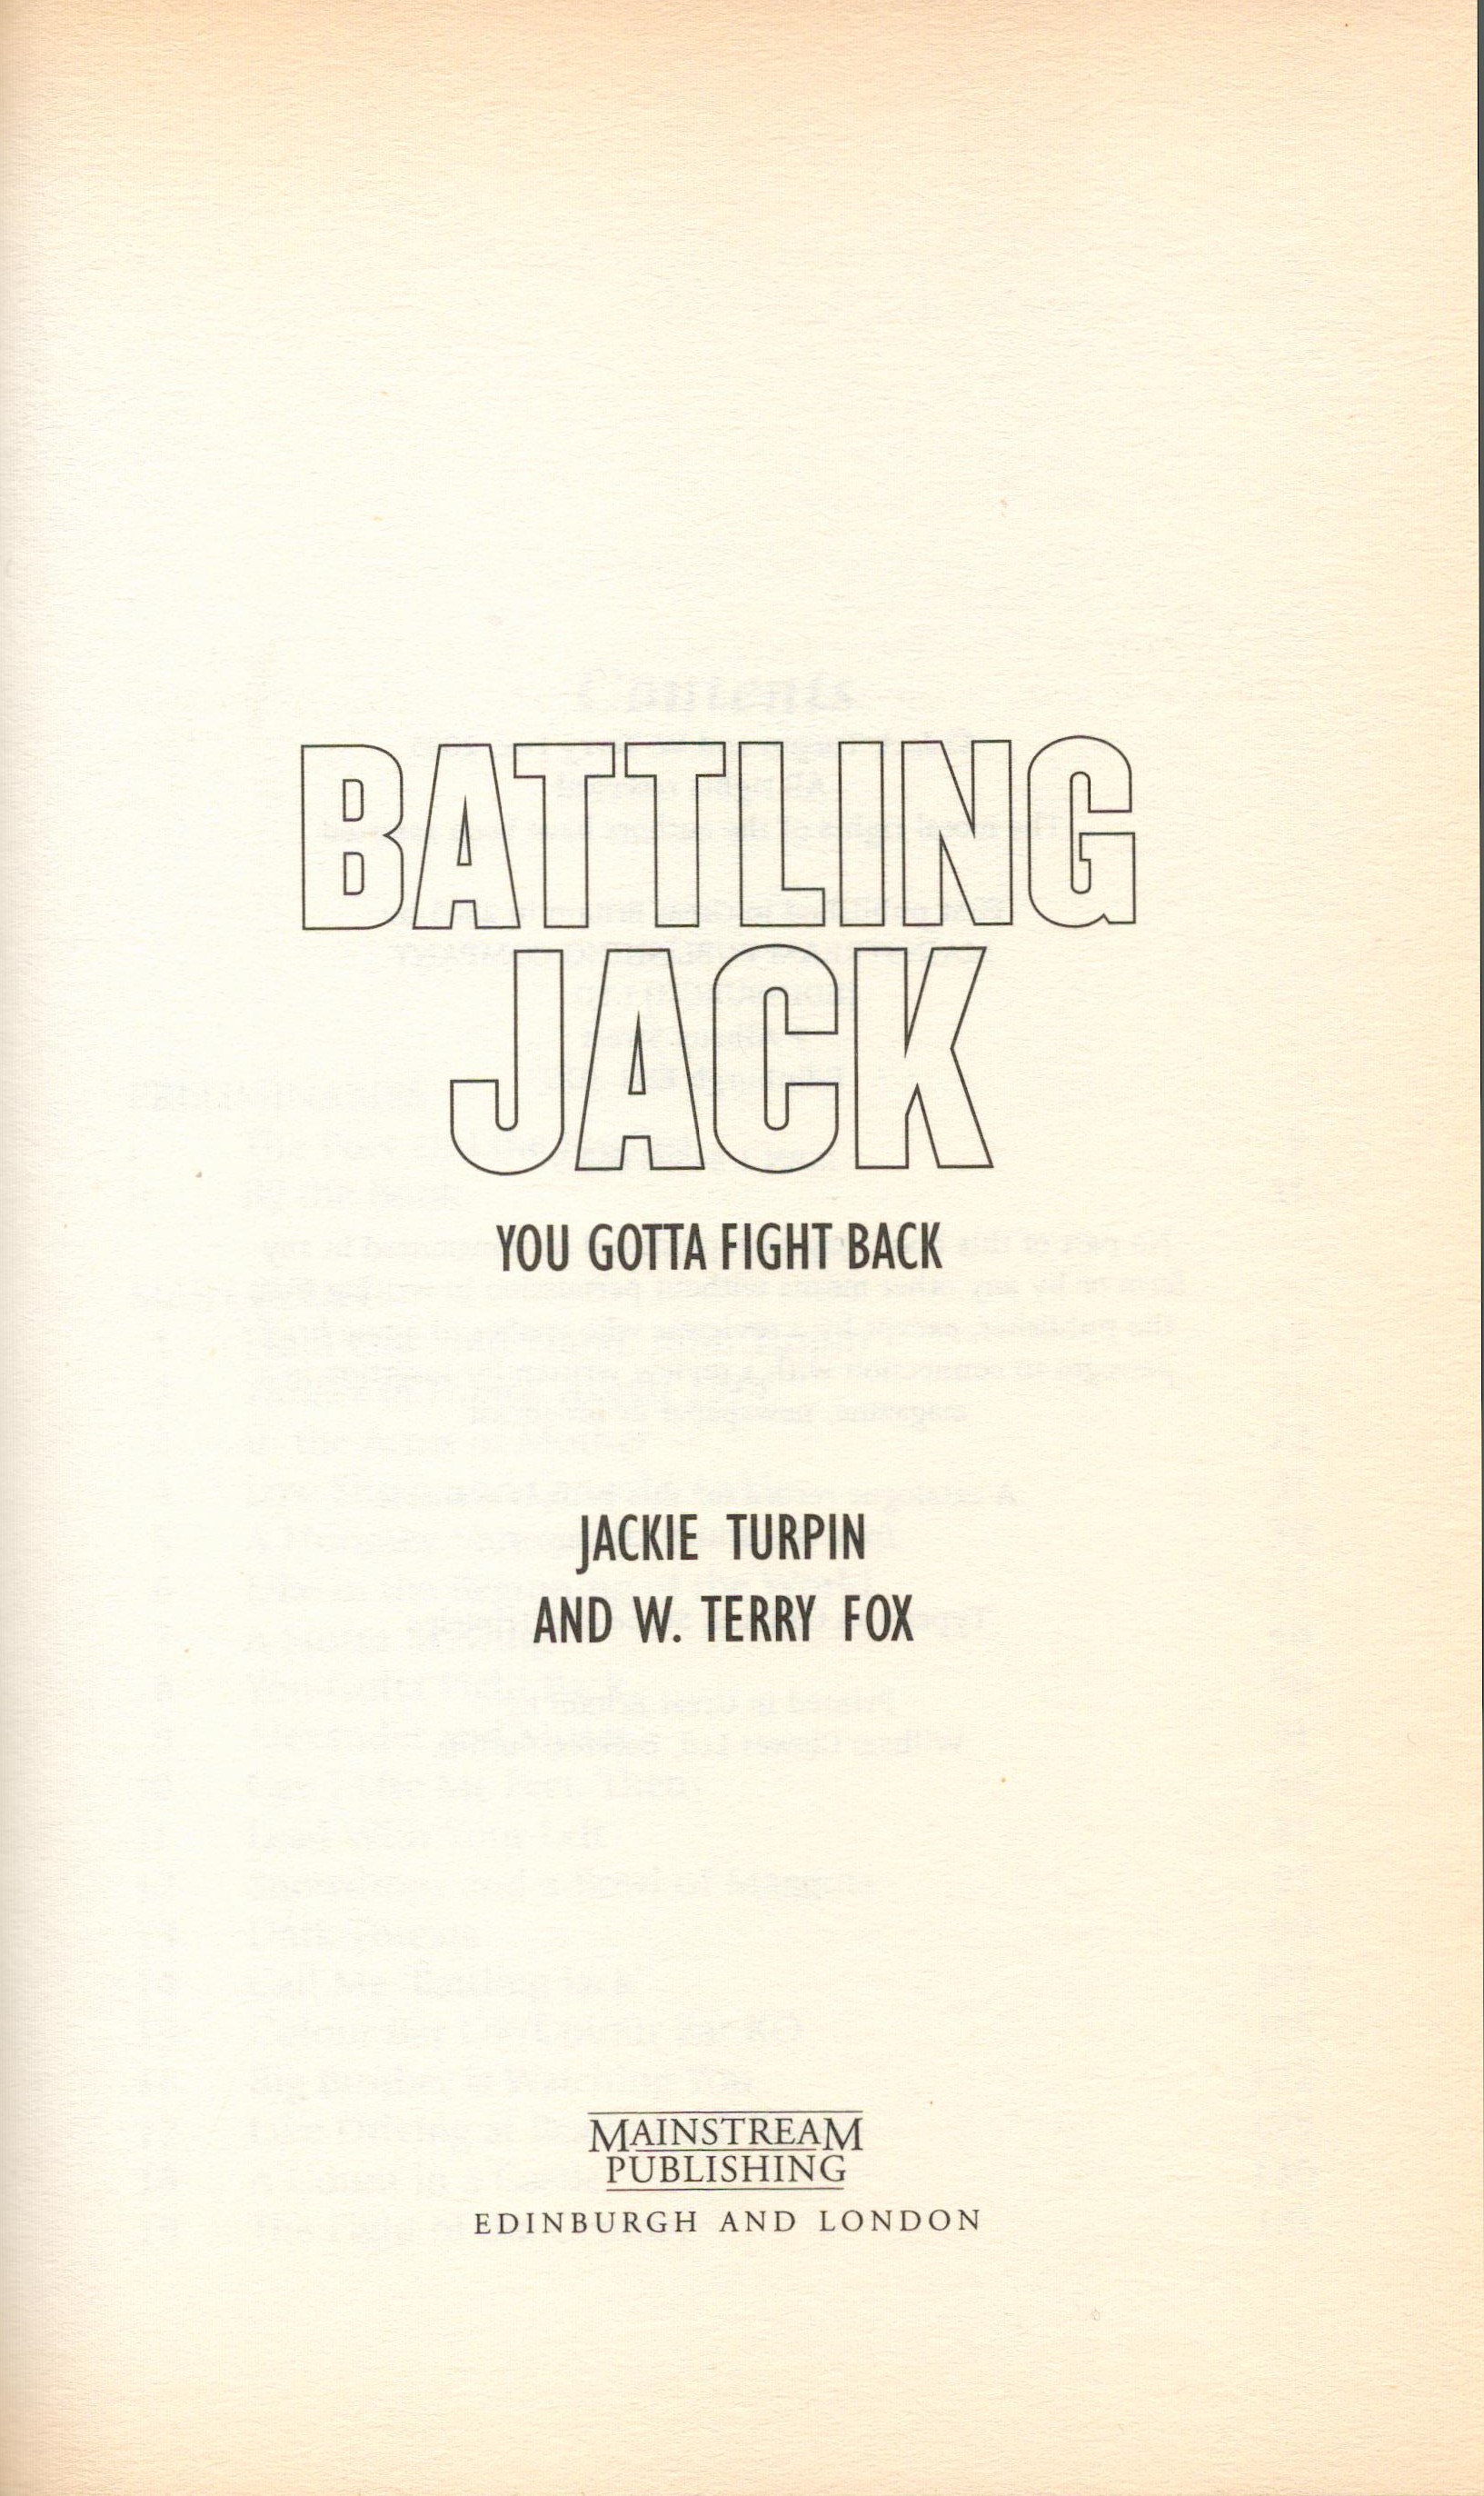 Battling Jack - You Gotta Fight Back by Jackie Turpin and W Terry Fox Softback Book 2005 First - Image 2 of 3